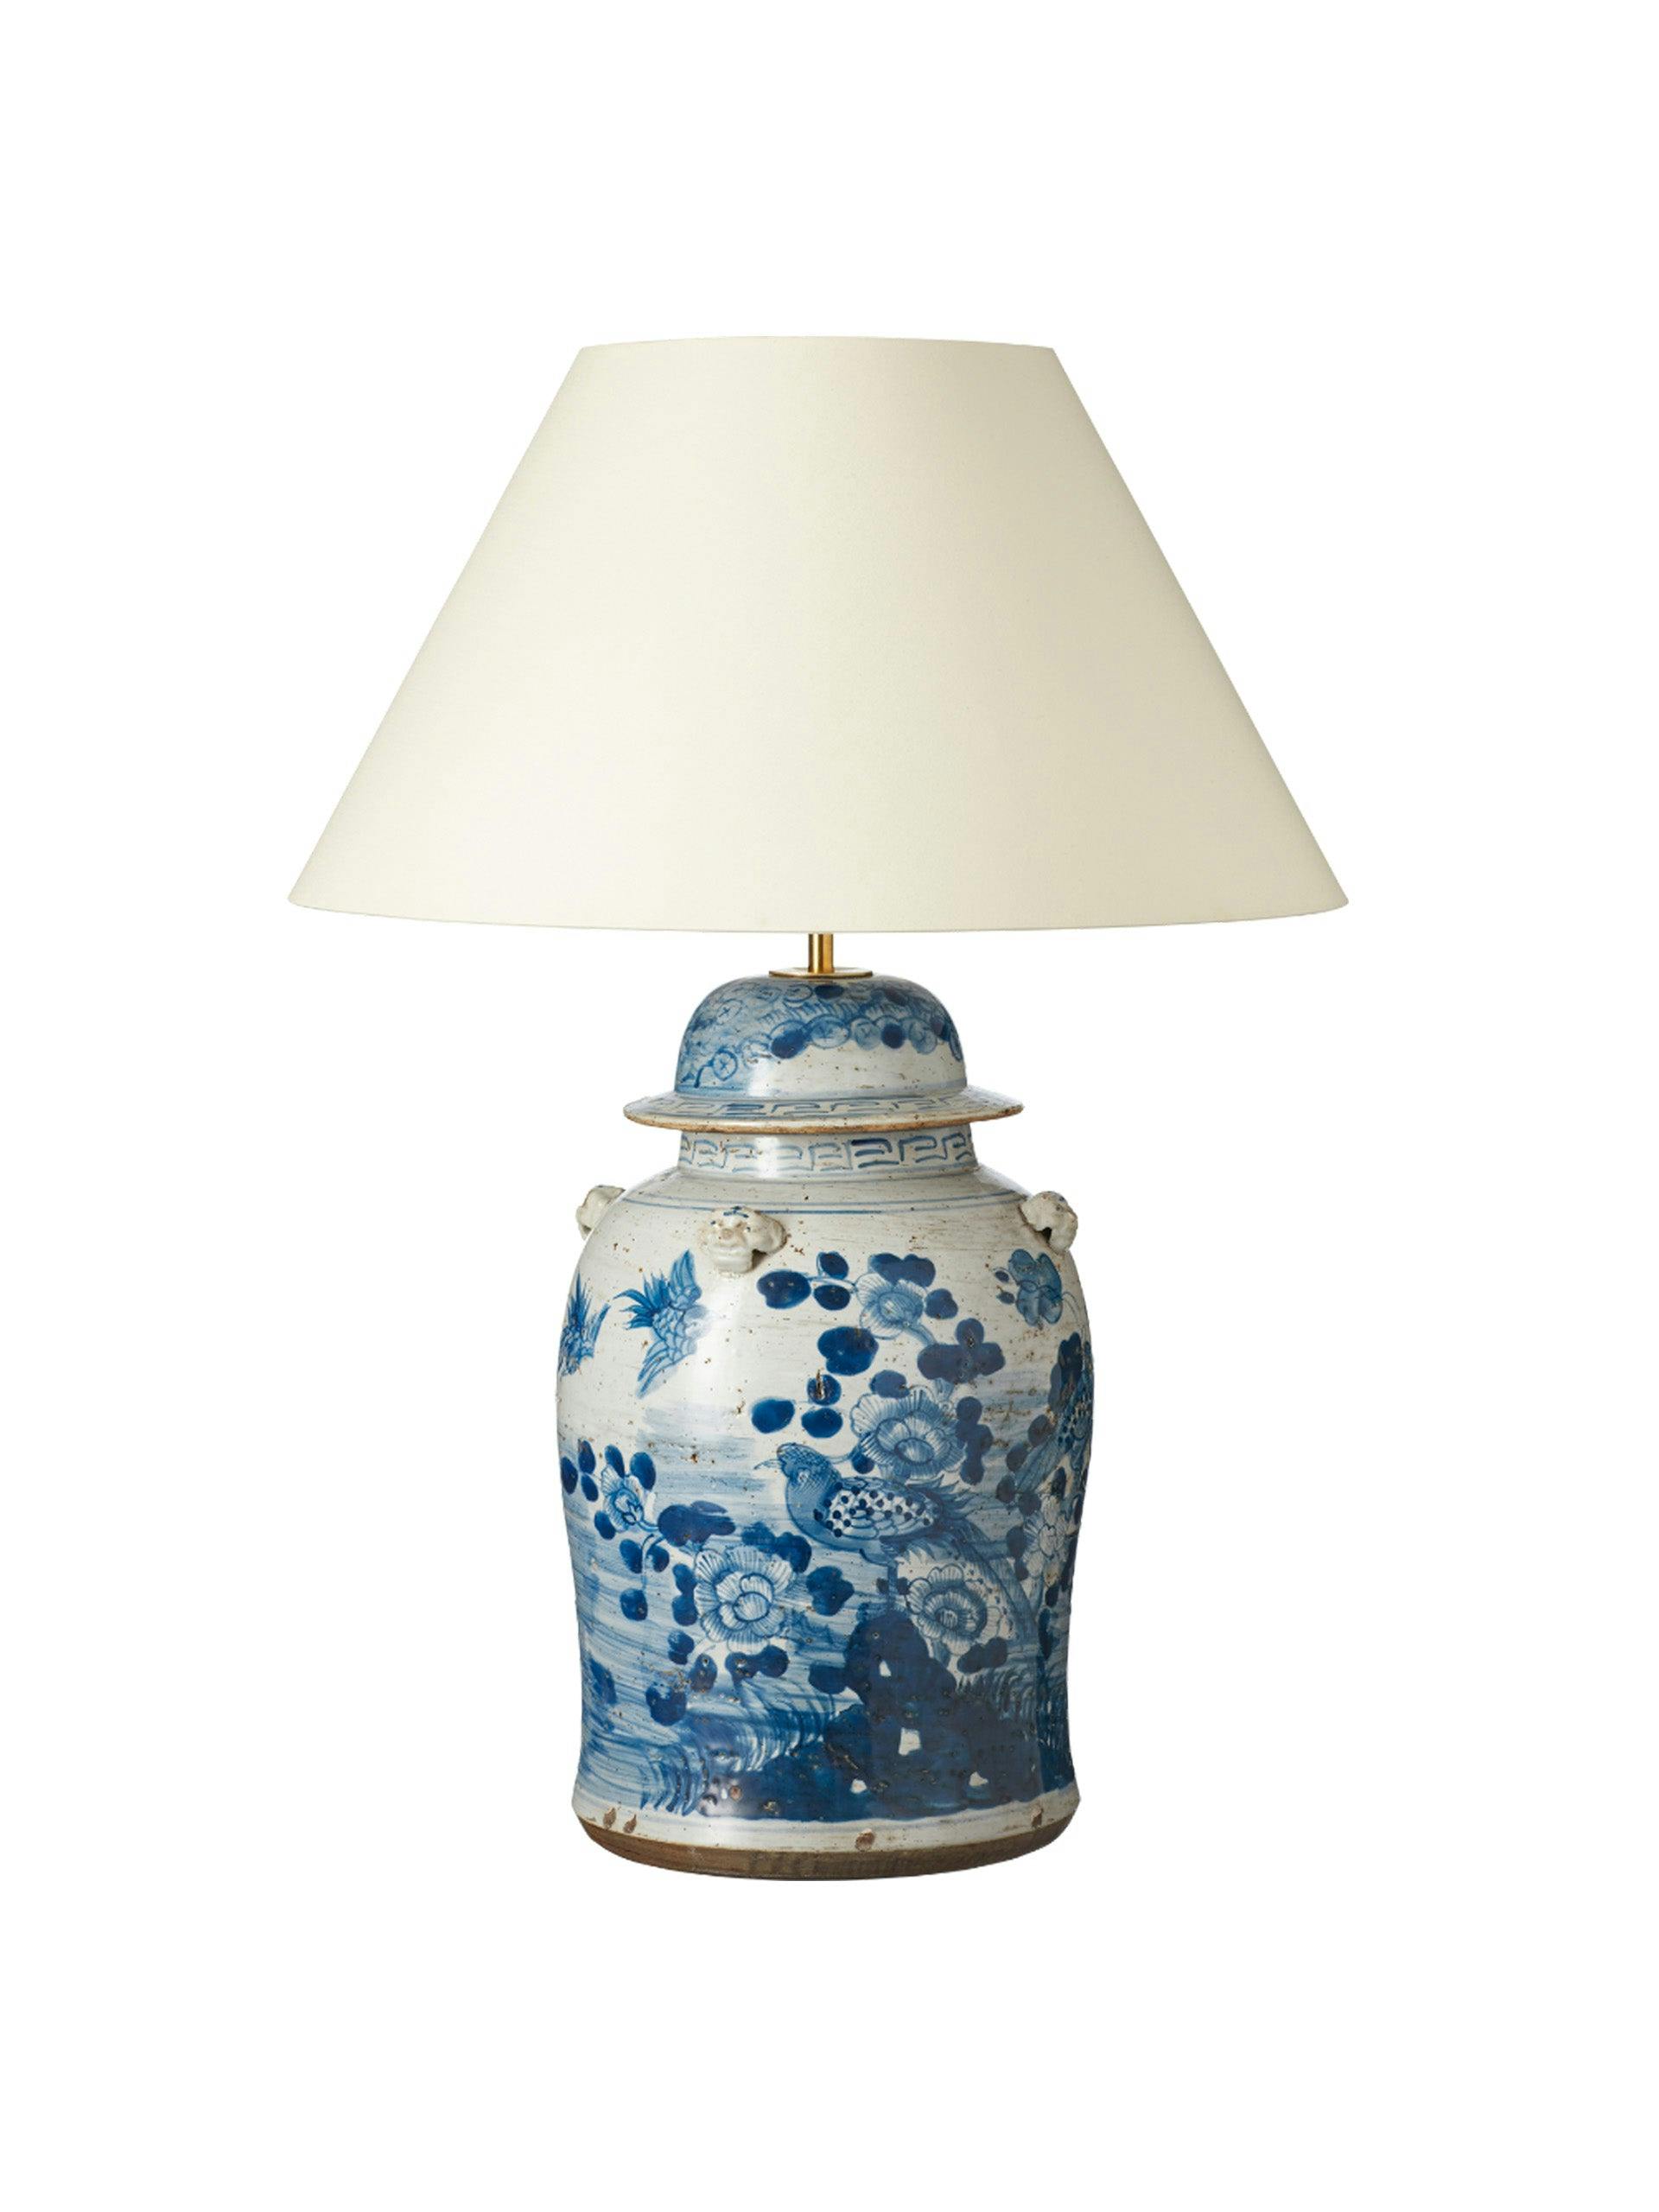 Fenghuang Chinese-style table lamp